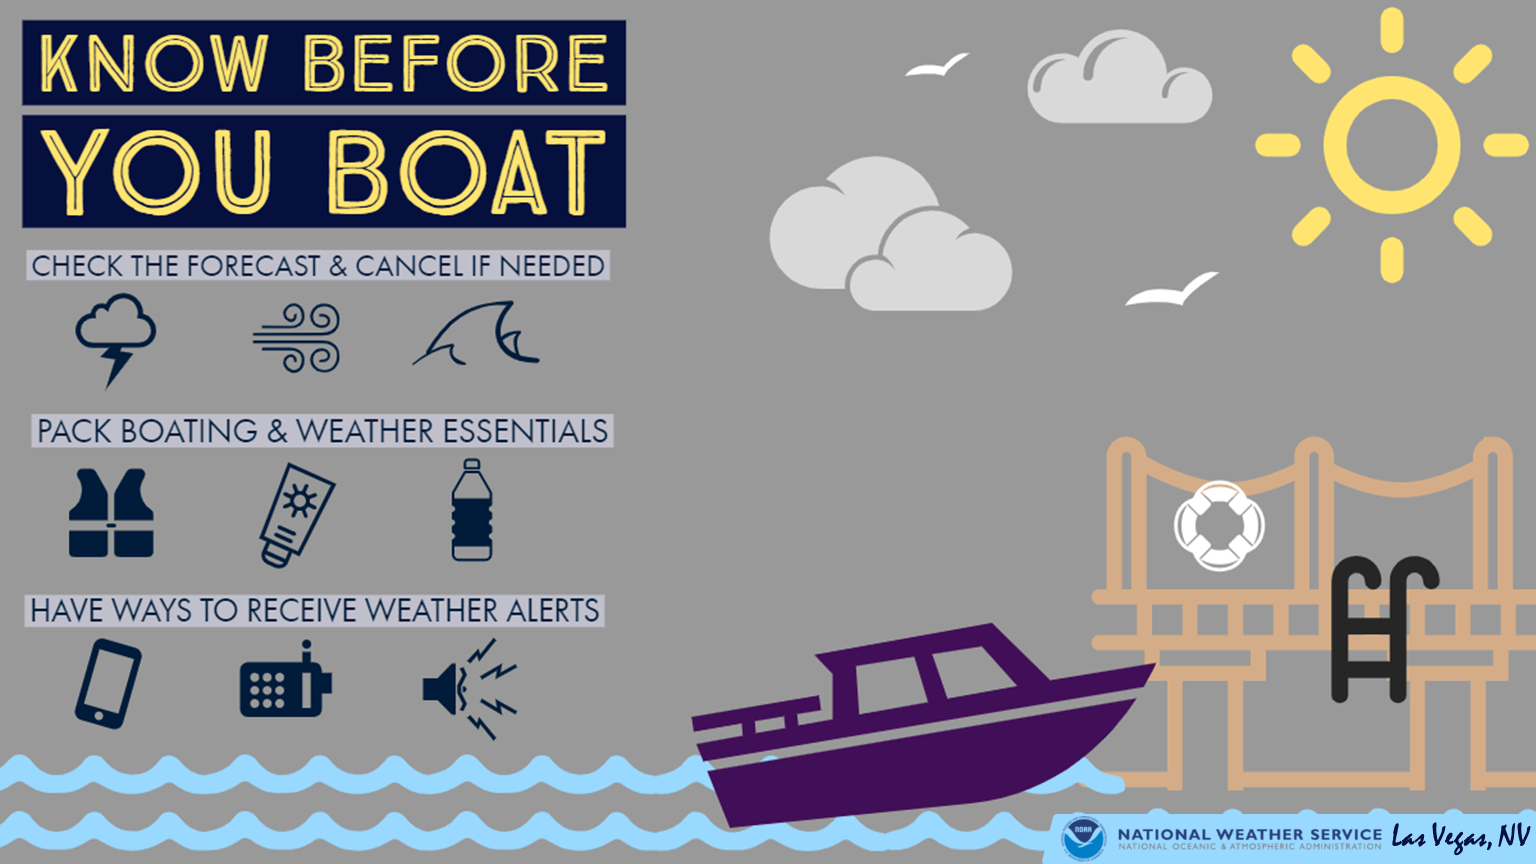 Know Before You Boat: Check the forecast & cancel if needed; Pack boating & weather essentials; Have ways to receive weather alerts